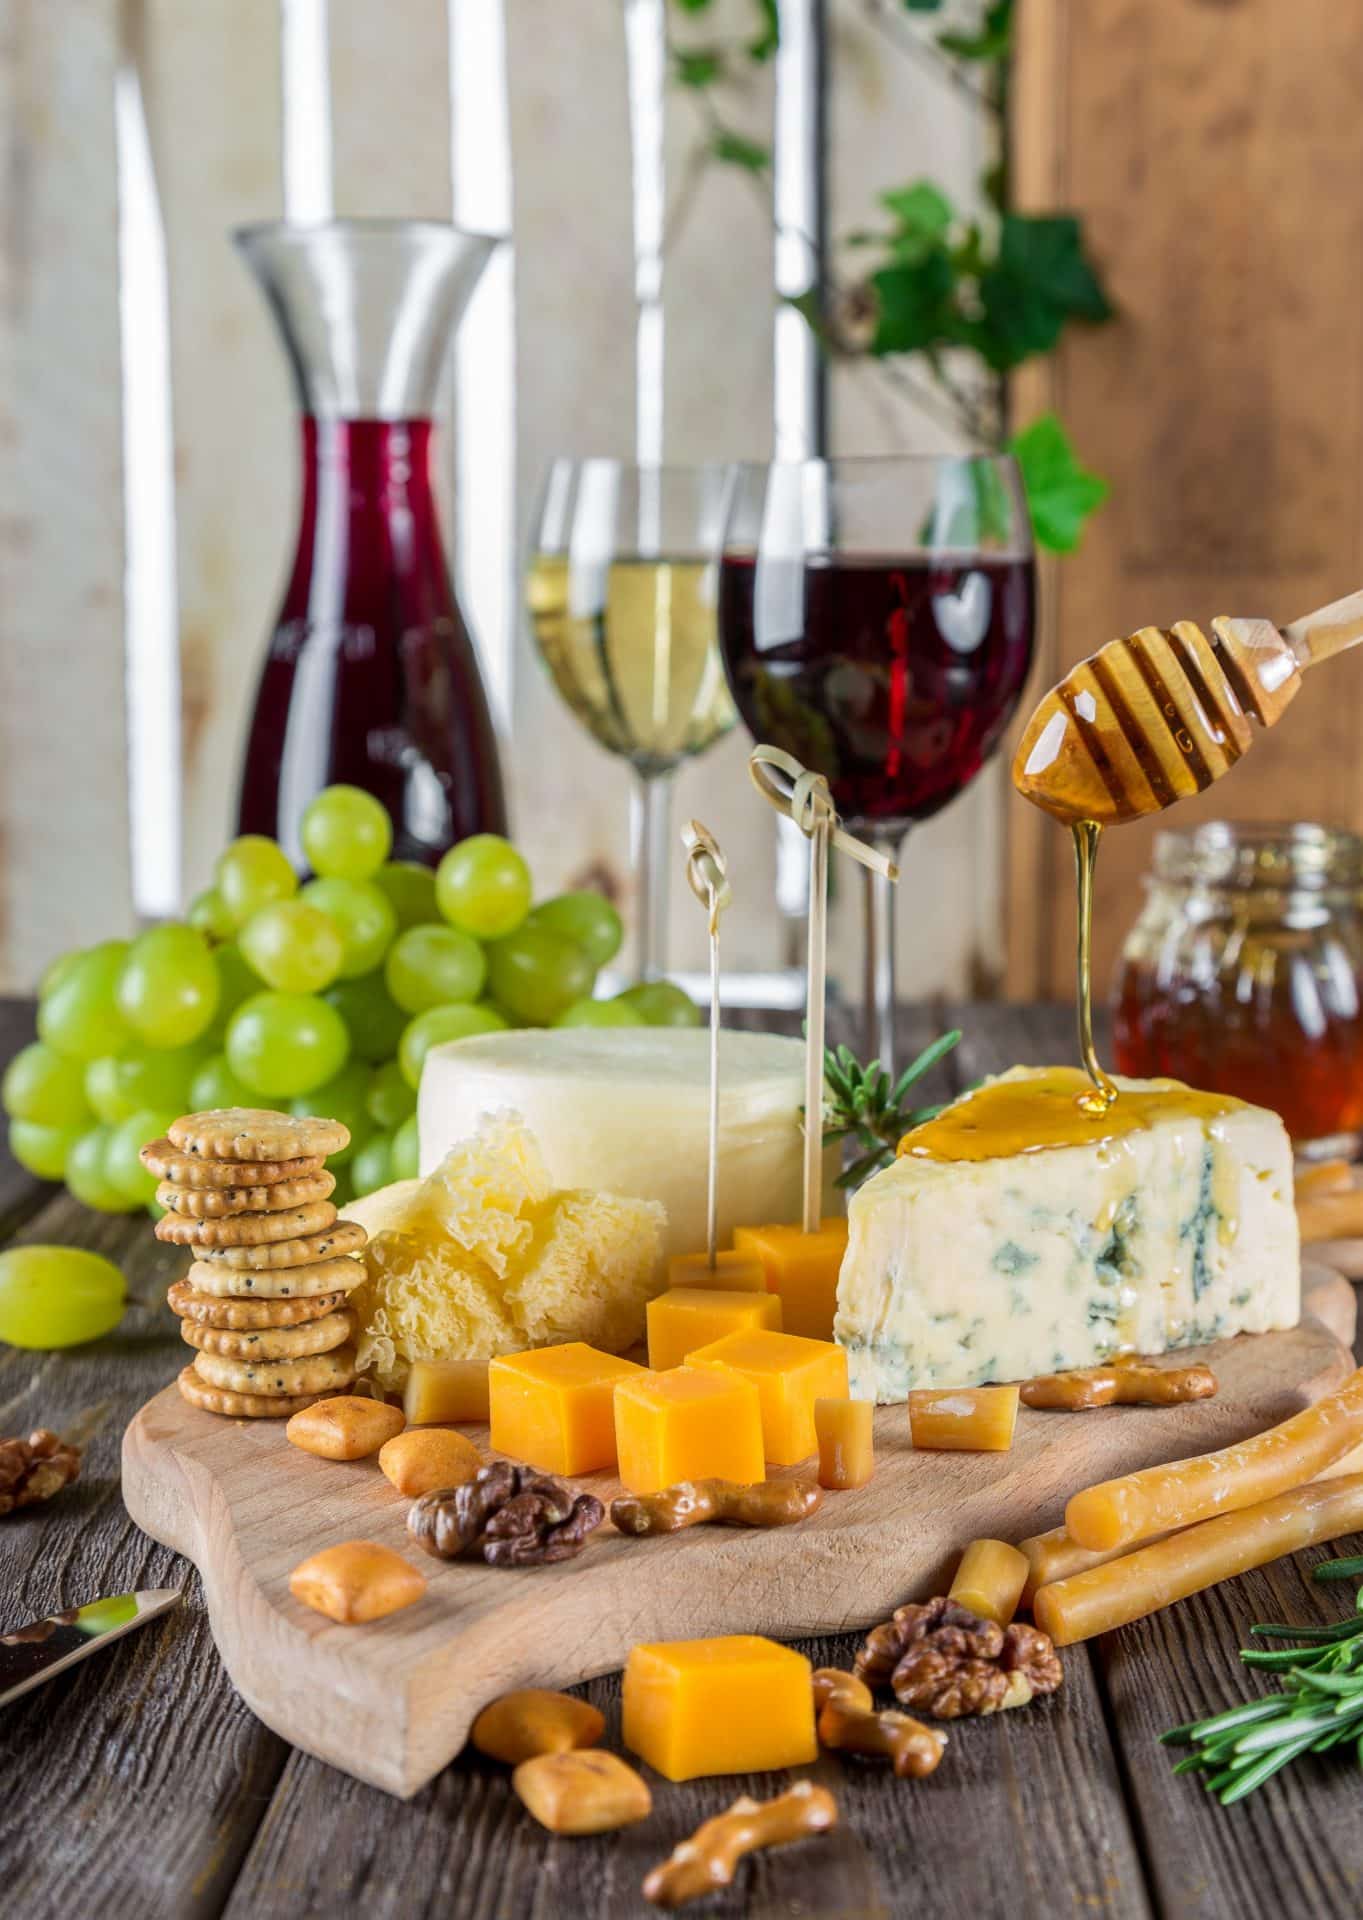 6 Mistakes to Avoid When Pairing Food and Wine